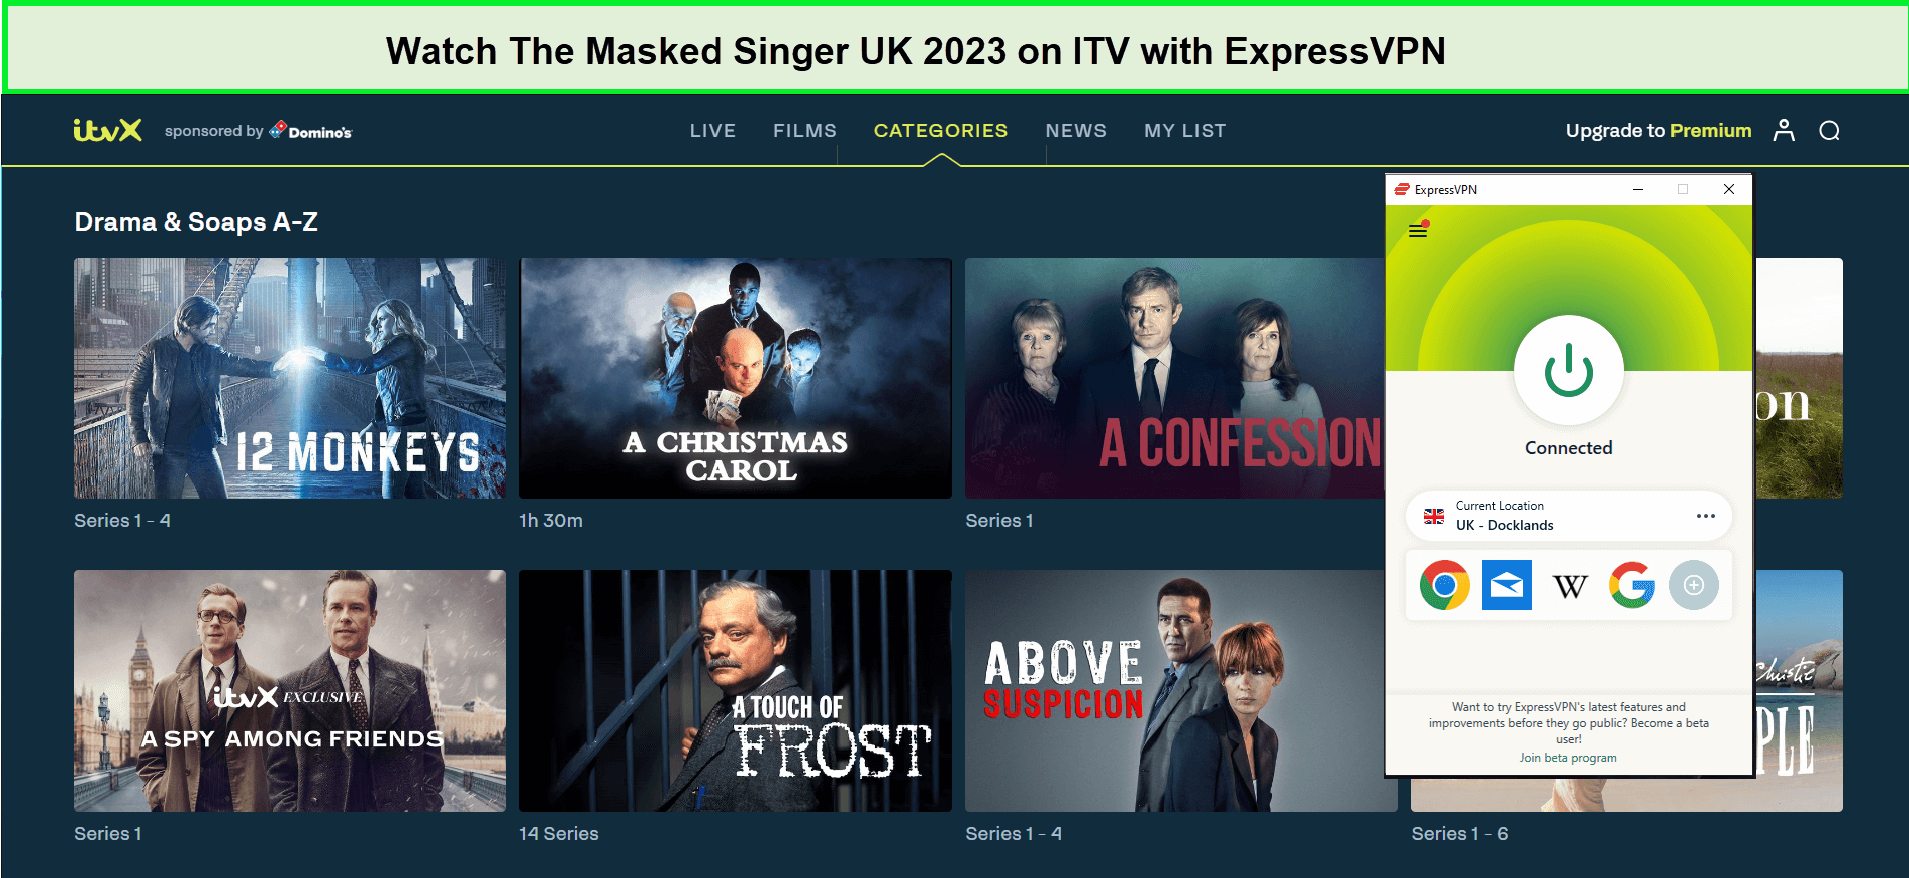 Watch-The-Masked-Singer-UK-2023-in-South Korea-on-ITV-with-ExpressVPN